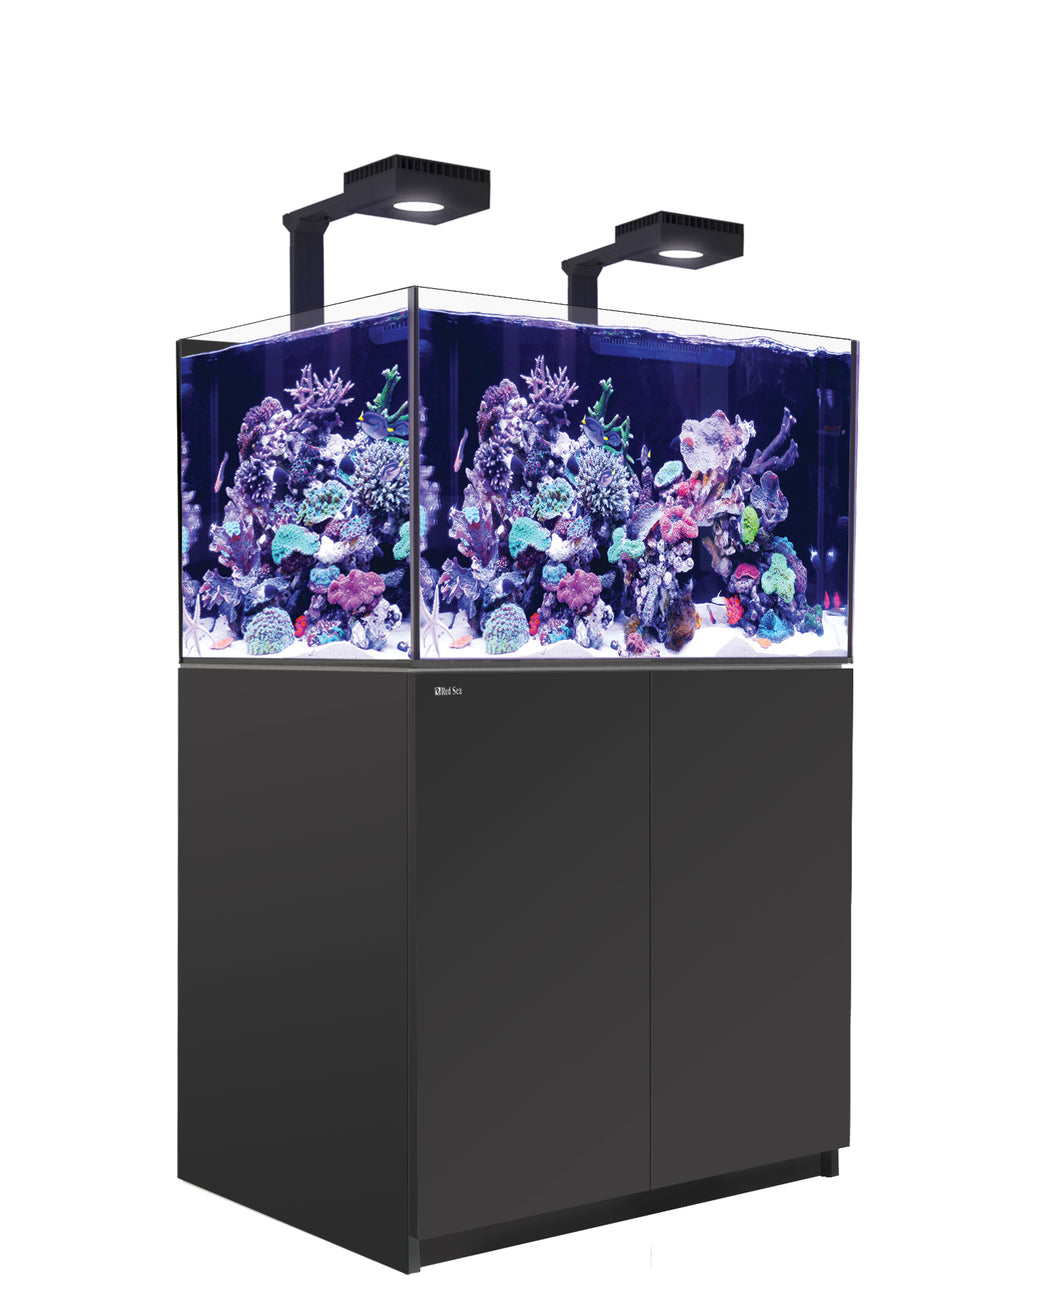 Red Sea REEFER-300 G2 Deluxe Premium Reef Aquarium 80 Gallons Reef-Ready LED Systems